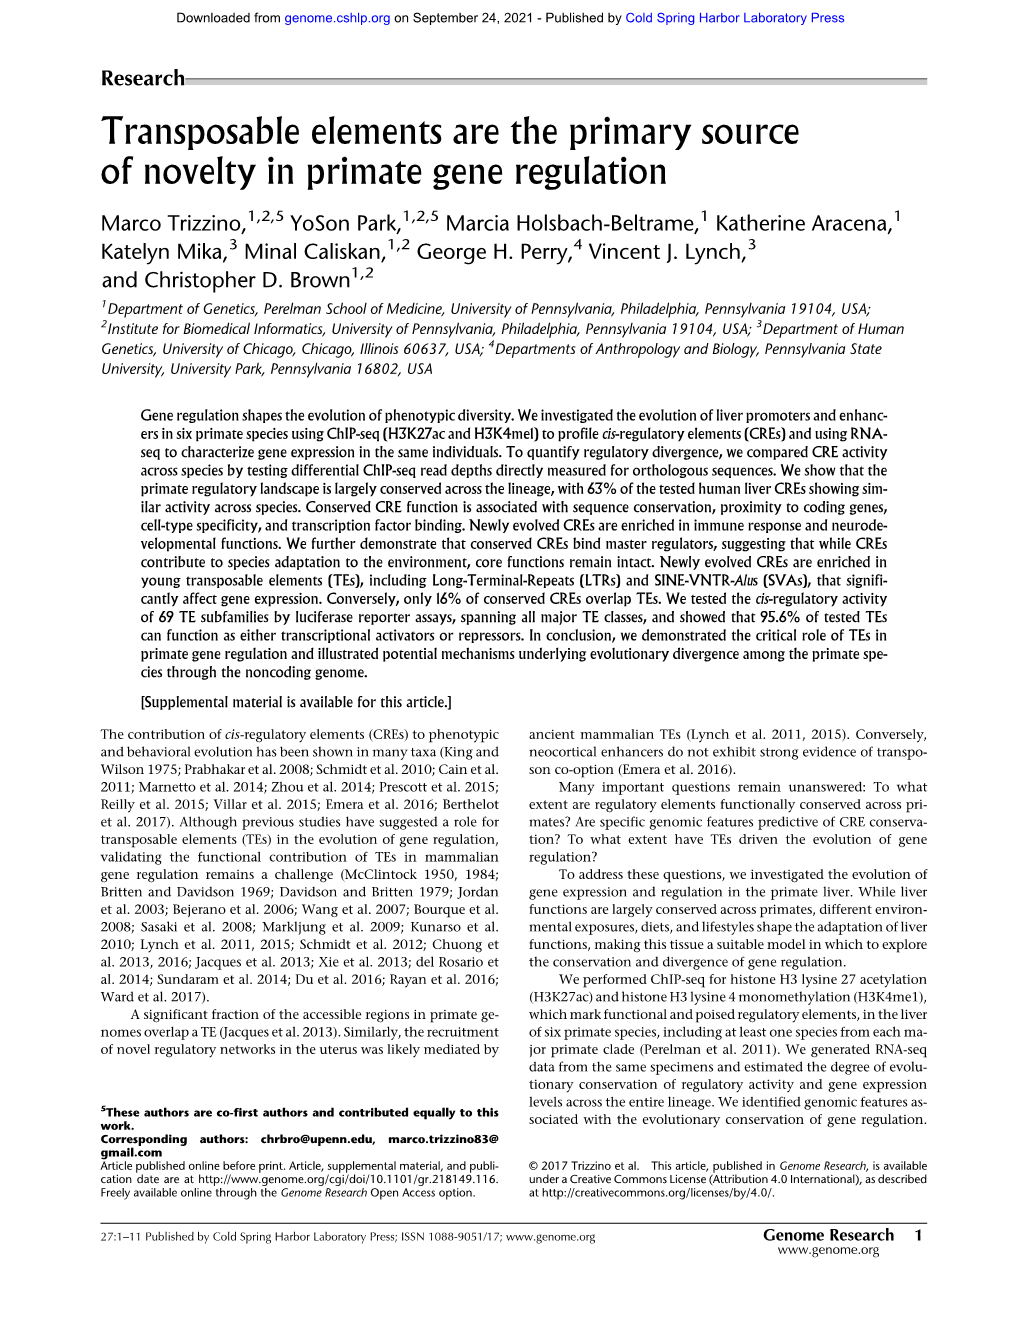 Transposable Elements Are the Primary Source of Novelty in Primate Gene Regulation